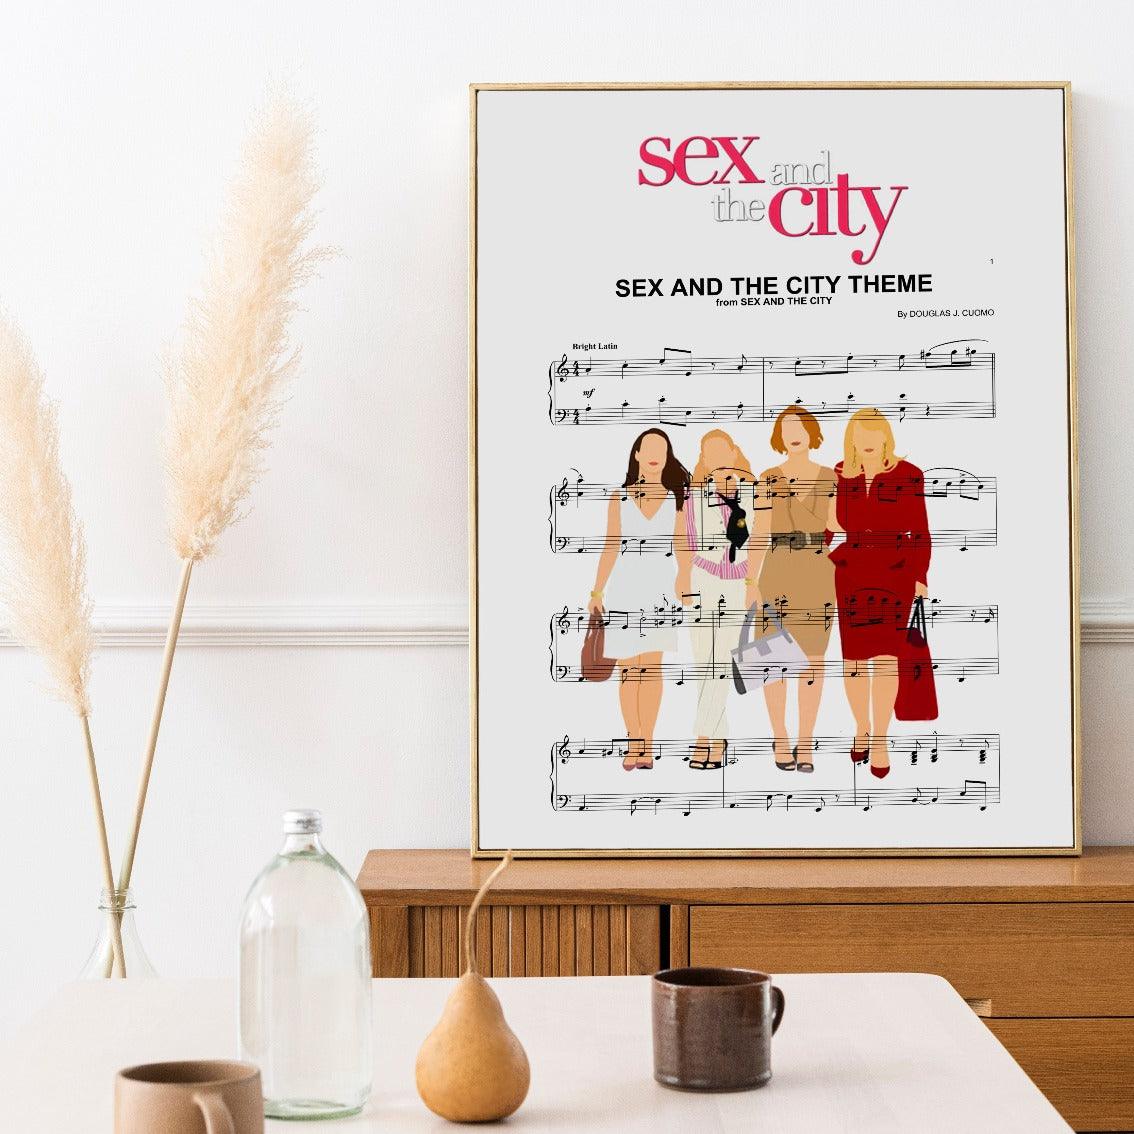 "The Theme from Sex and the City" is the show's theme song, composed by Aaron Zigman. The song was well-received by audiences and critics and helped to set the tone of the show. The show "Sex and the City" was a popular American television series that ran from 1998 to 2004.  It followed the lives of four friends, Carrie Bradshaw, Samantha Jones, Charlotte York, and Miranda Hobbes, as they navigate their way through love, sex, and friendship in New York City